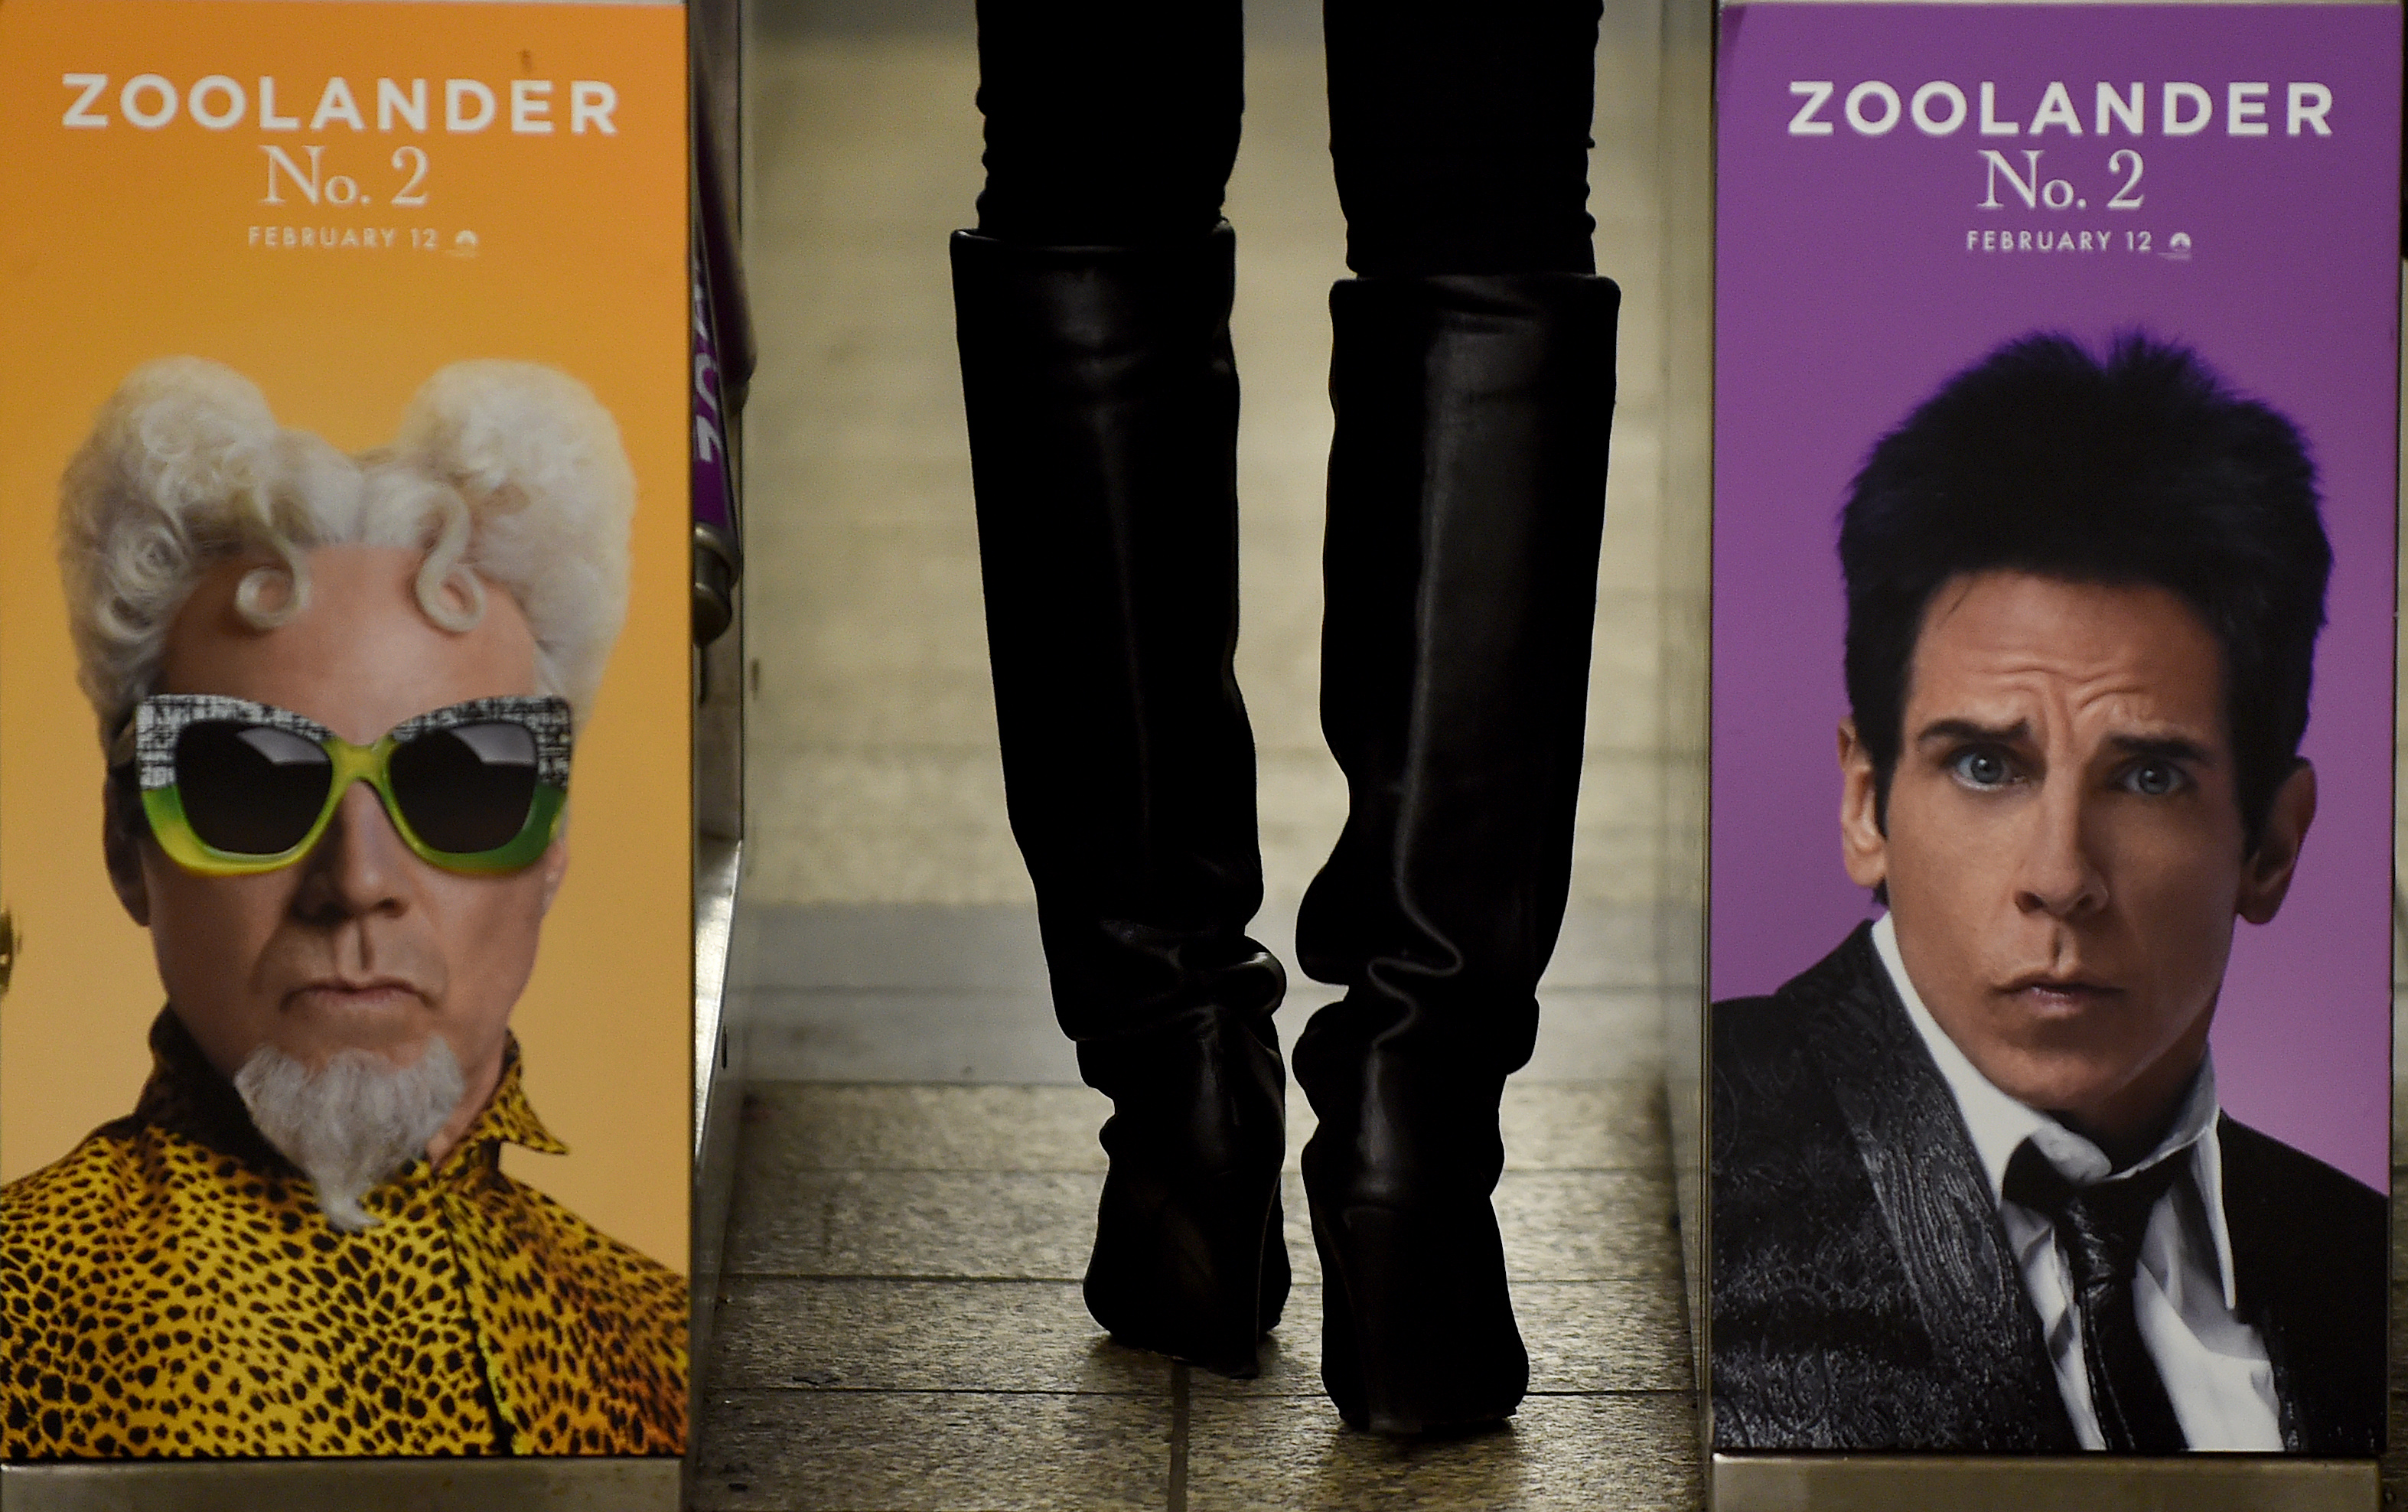 (FILES) This file photo taken on February 25, 2016 shows a woman passing through a turnstile in the New York City Subway with a advertisment for "Zoolander No. 2" featuring Ben Stiller (R) and Will Ferrell. "Zoolander," and "Batman v Superman" topped nominations announced  January 23, 2017 for the Razzies, Hollywood's anti-awards celebrating the worst films of 2016. Leading the list is "Zoolander No. 2." -- "the 15-years-too-late sequel" -- with nine nominations including for worst picture, worst actor (Ben Stiller) and worst supporting actress (Kristen Wiig).  / AFP PHOTO / Timothy A. CLARY